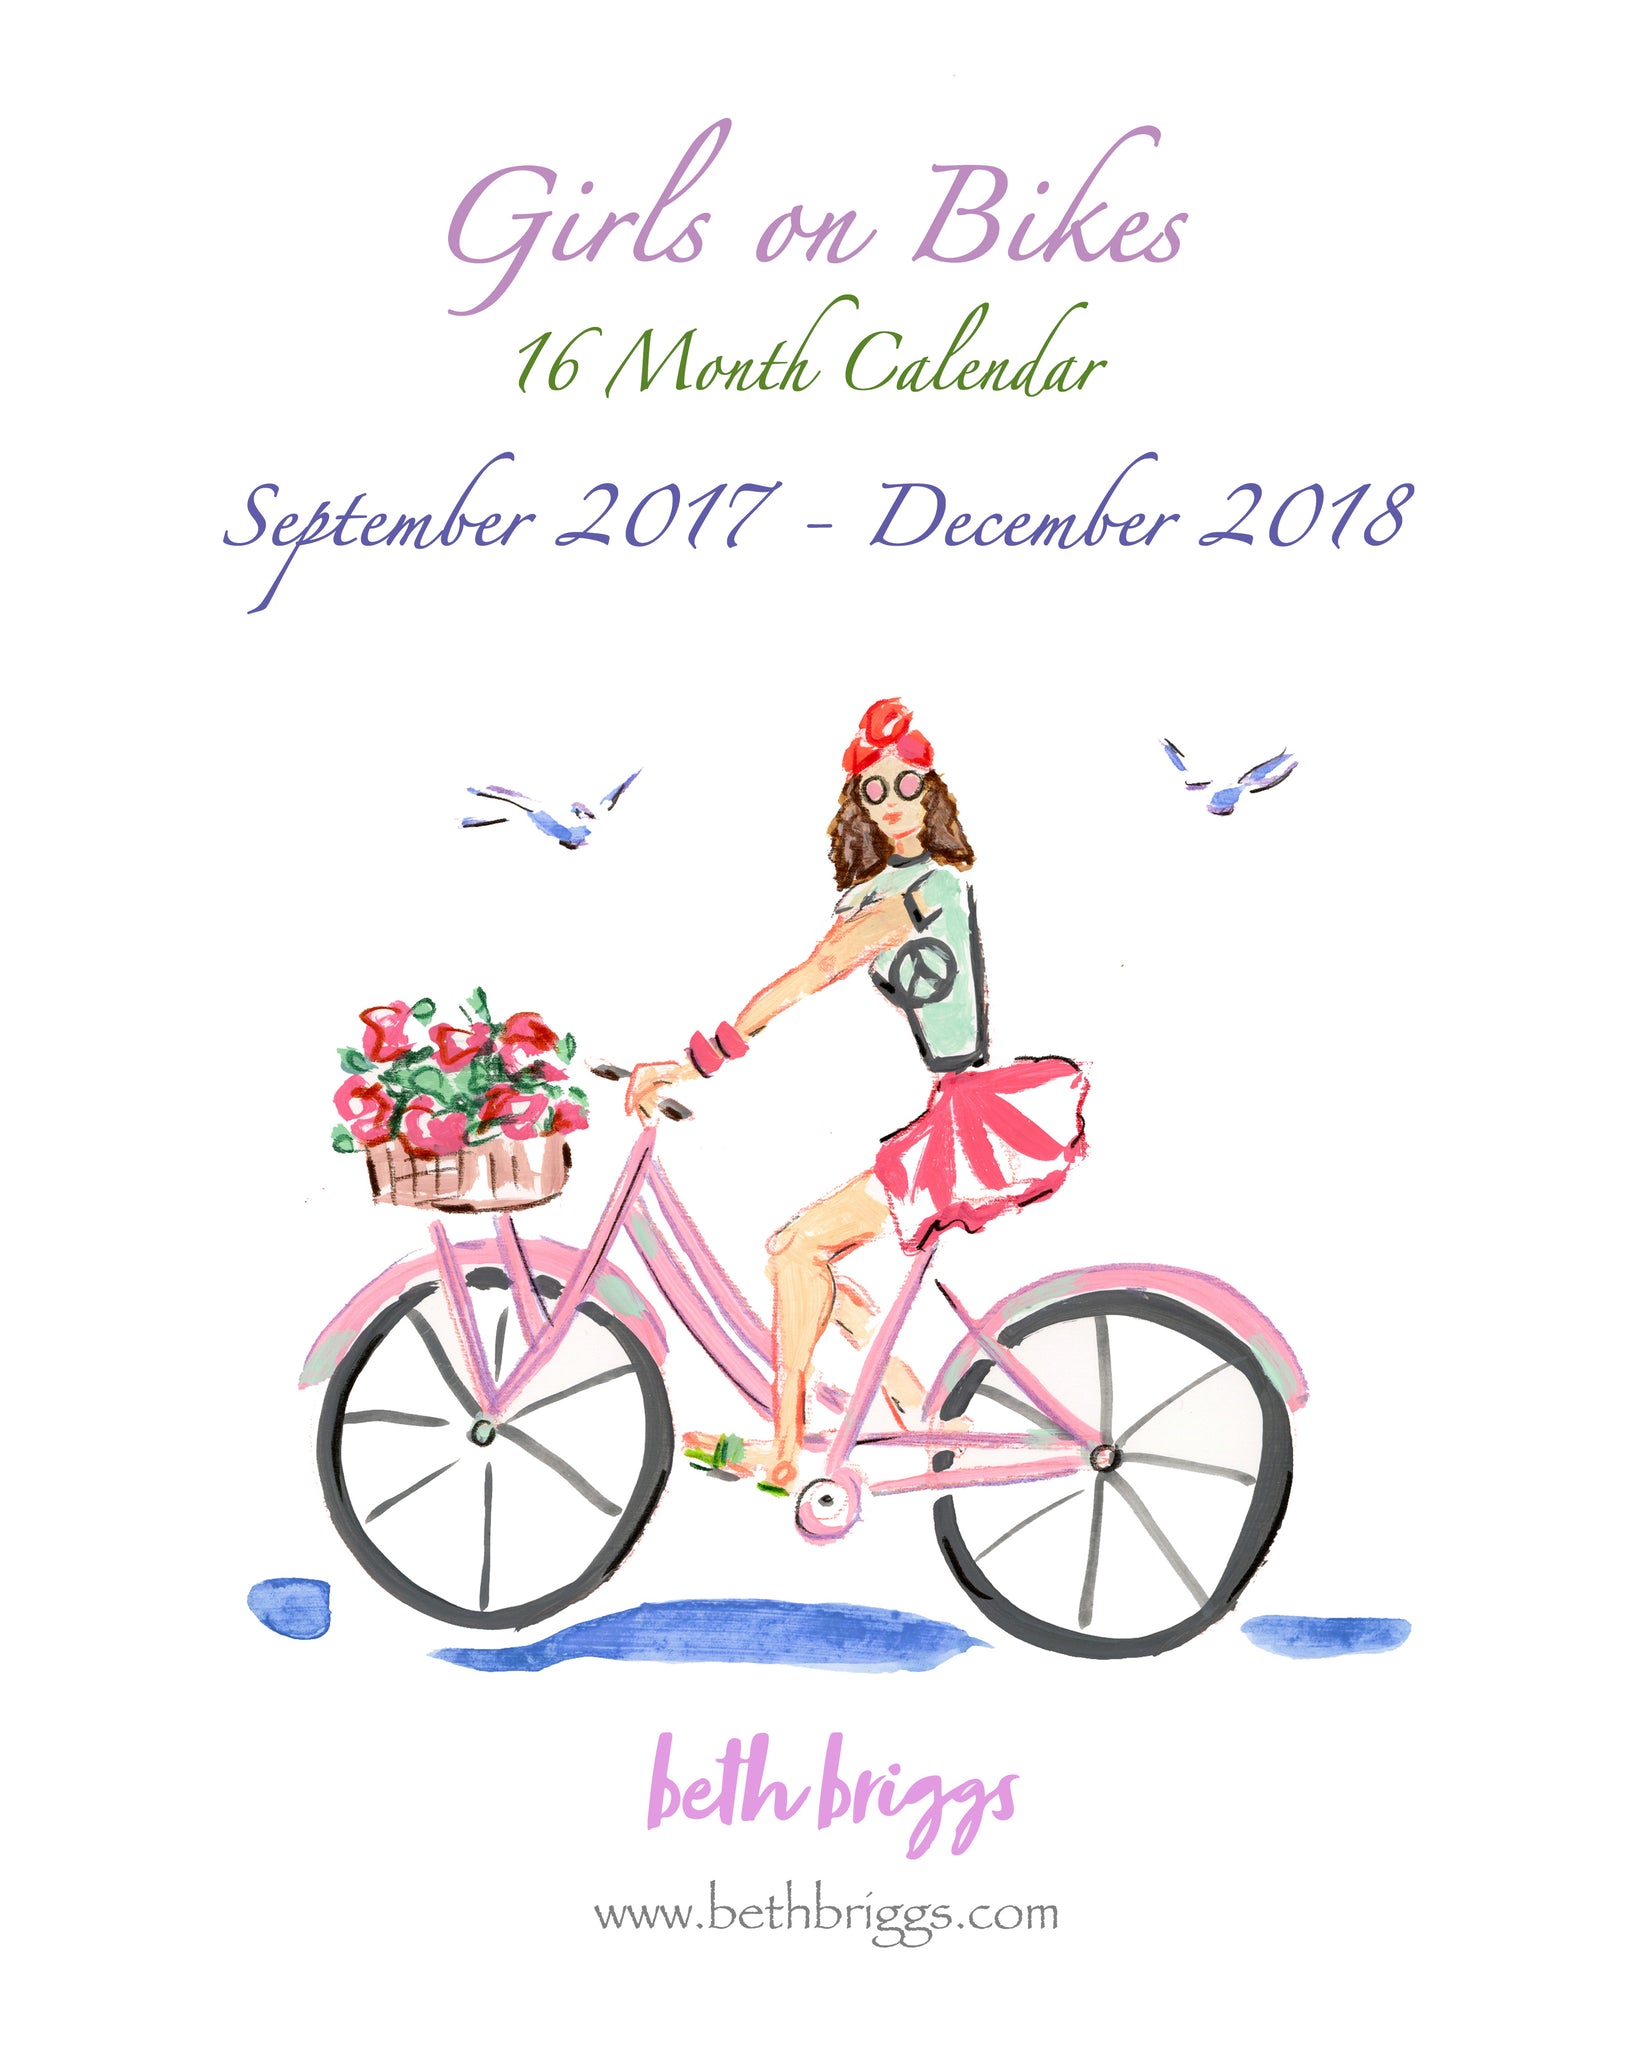 They'e back! 16 Month "Girls on Bikes" Back to School Calendars.....